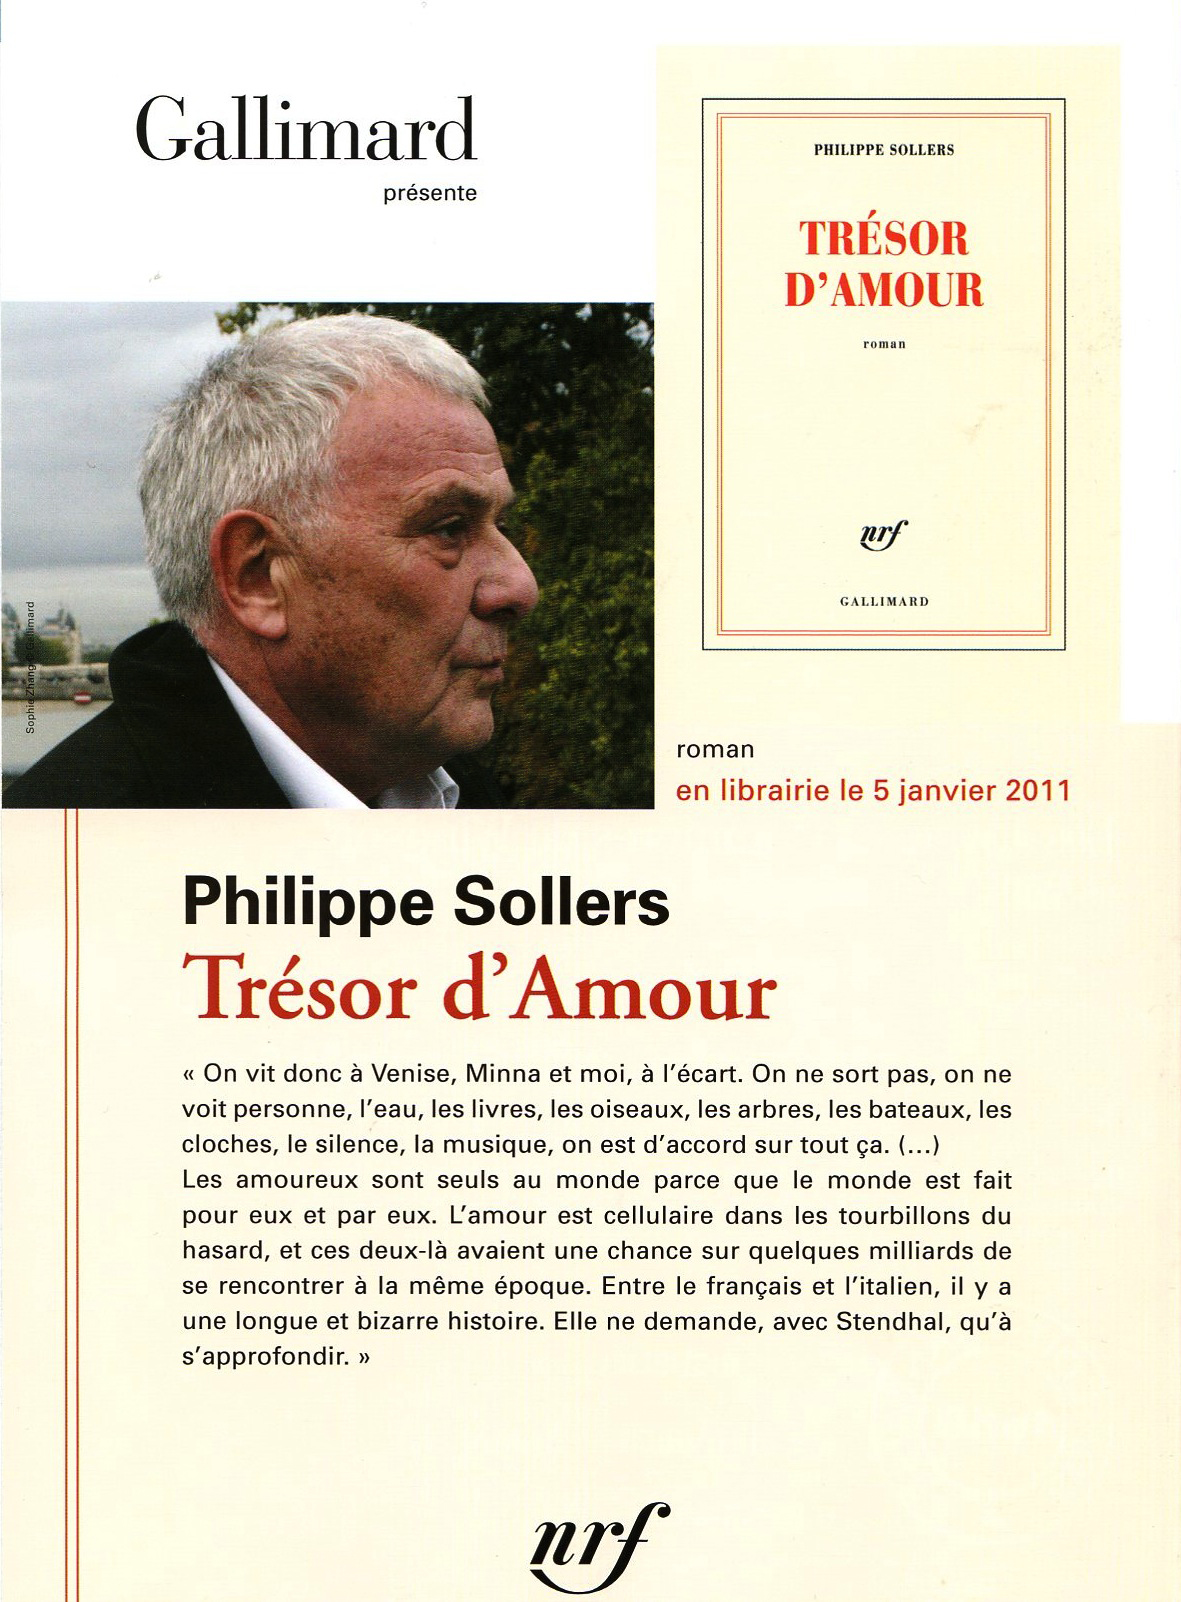 Philippe Sollers Trsor d'Amour - Gallimard